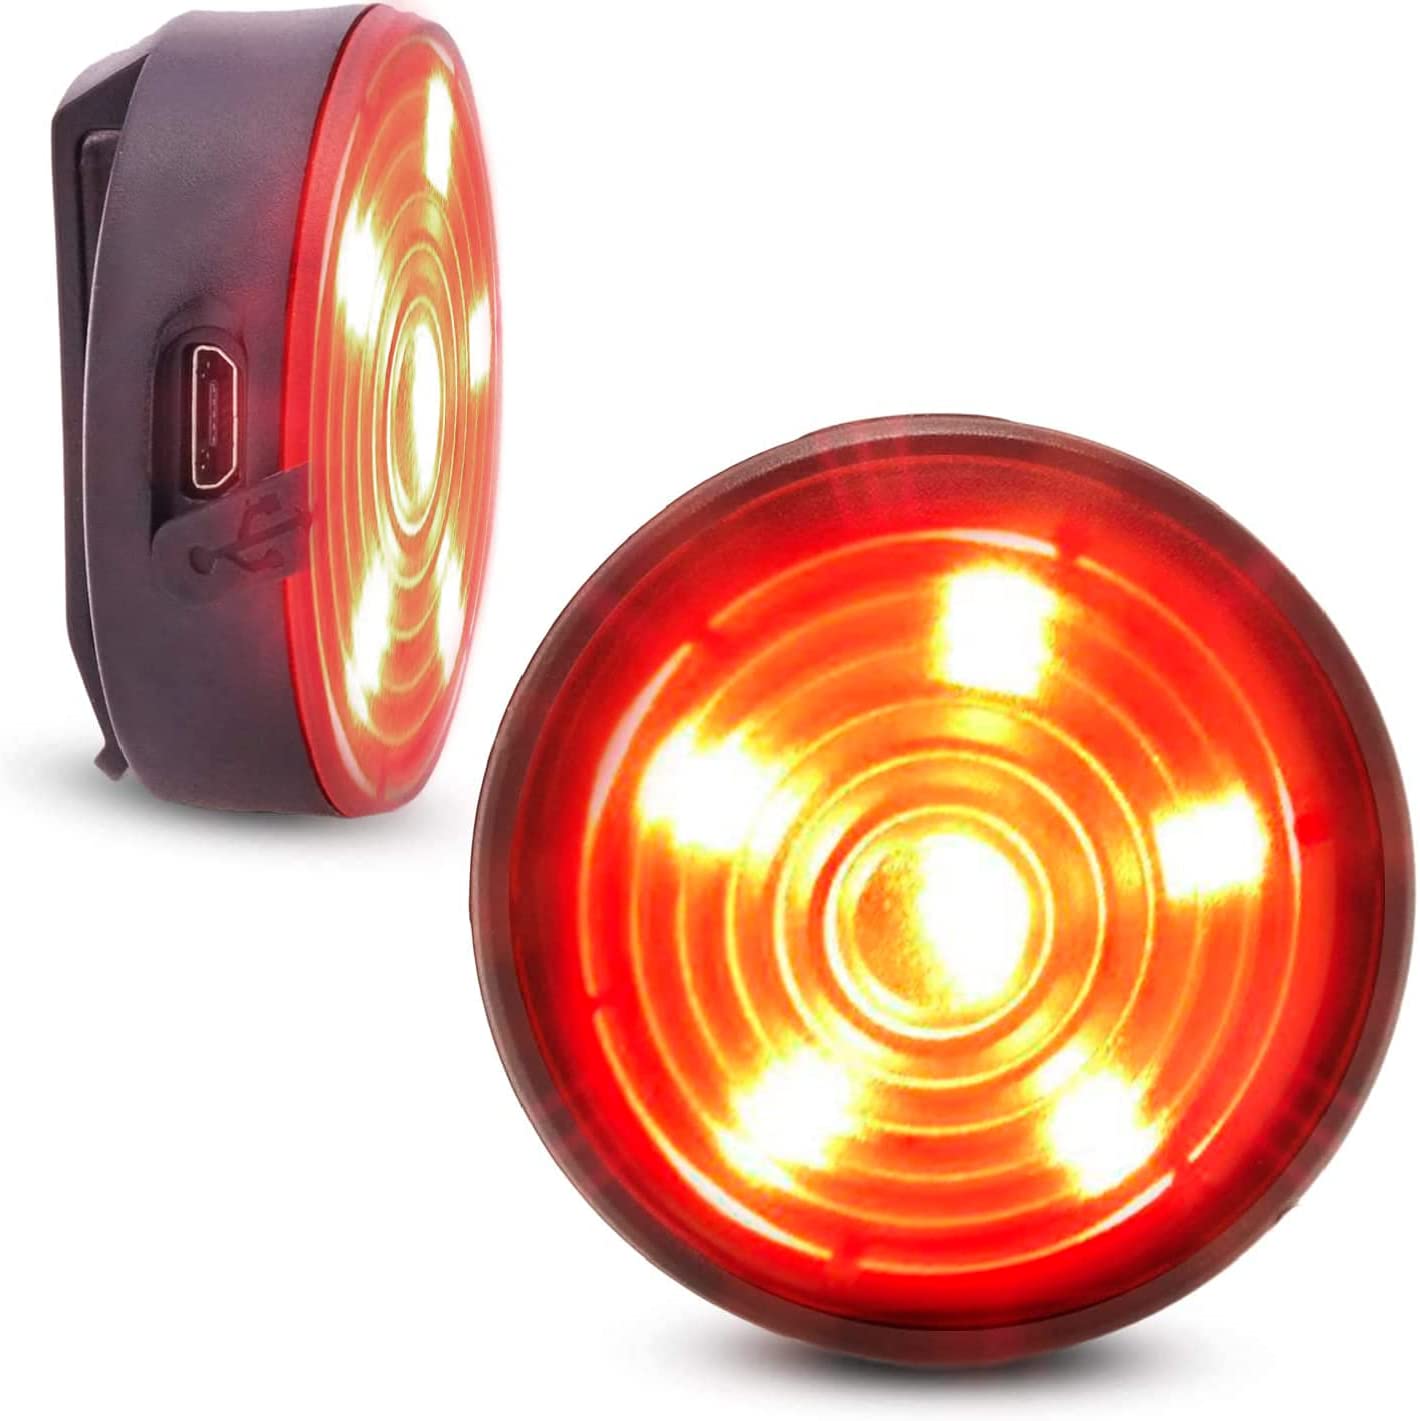 Everbeam E200 LED Safety Lights Rechargeable - 2 Pack